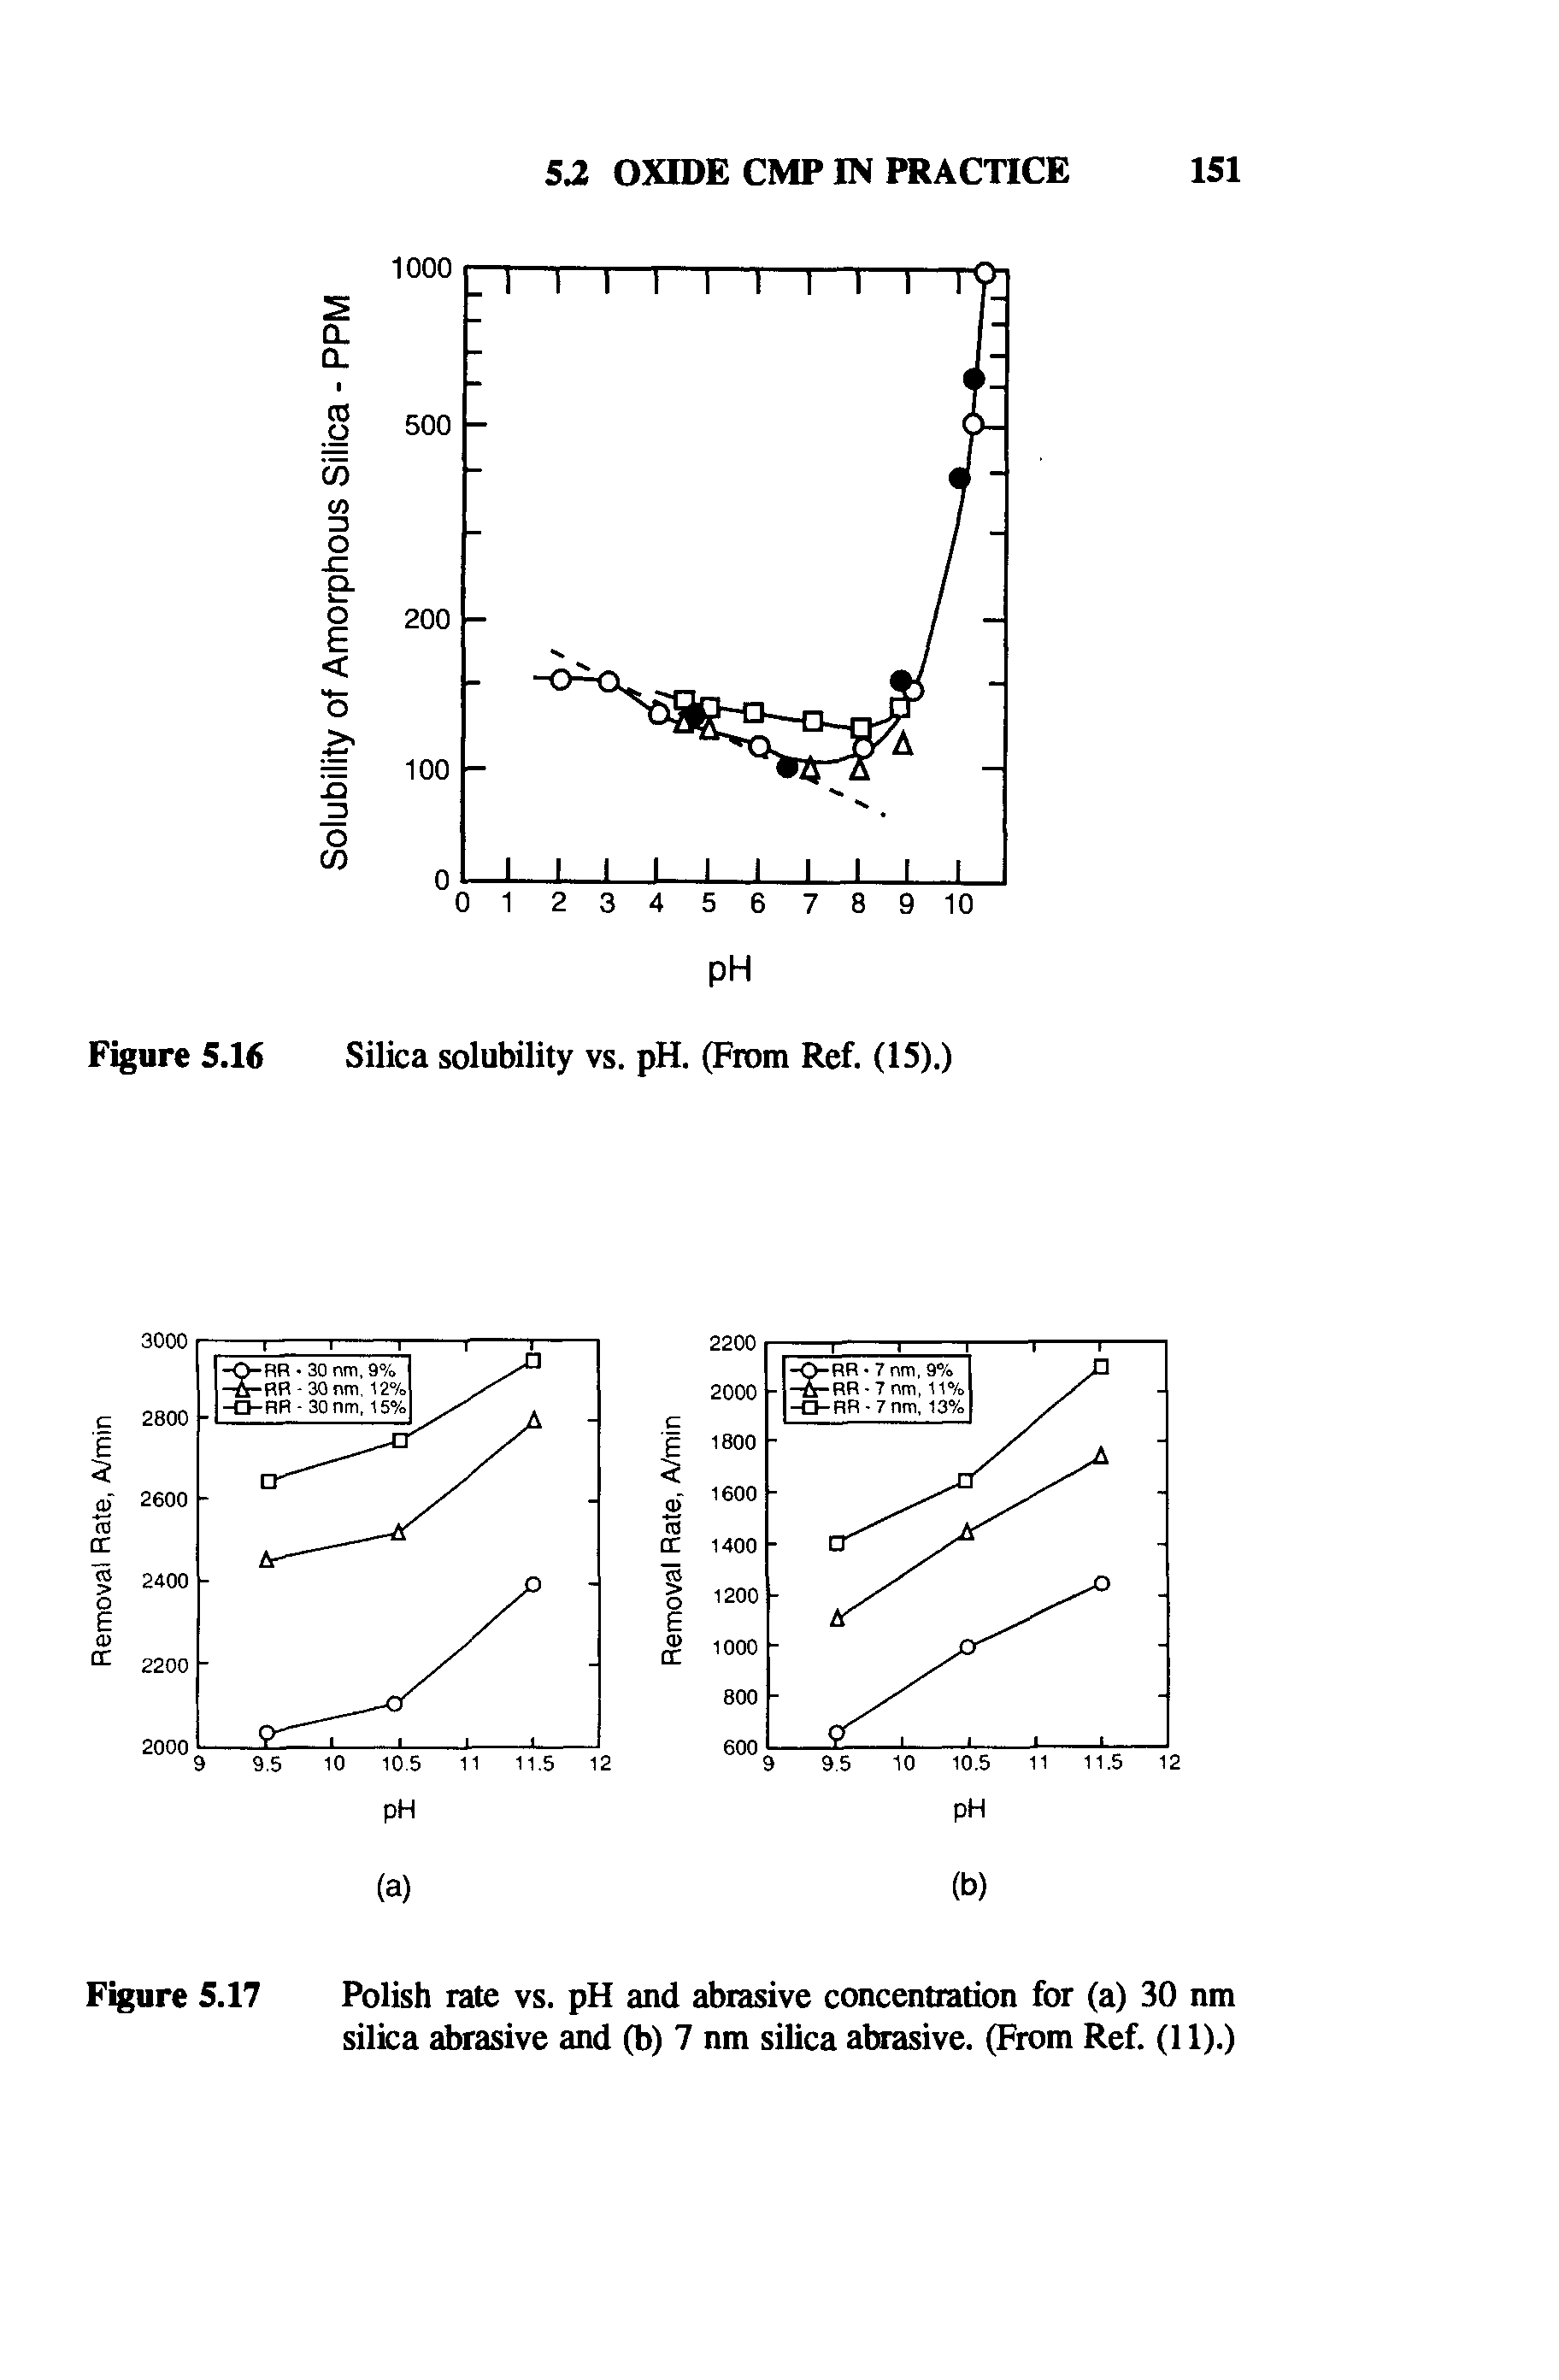 Figure 5.17 Polish rate vs. pH and abrasive concentration for (a) 30 nm silica abrasive and (b) 7 nm silica abrasive. (From Ref. (11).)...